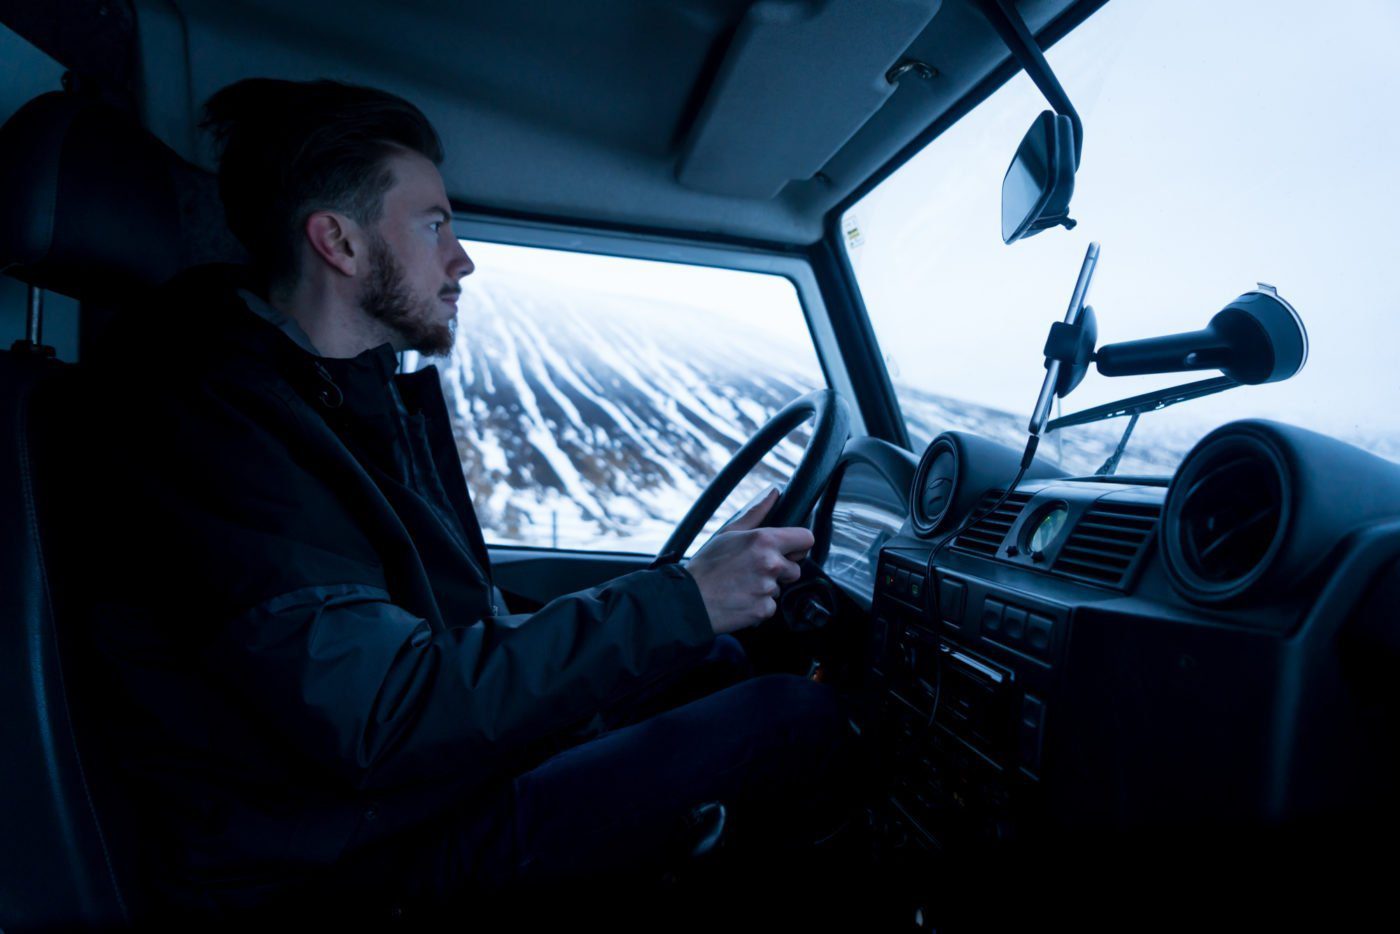 Super jeep tour in Iceland with SouthCoast Adventure